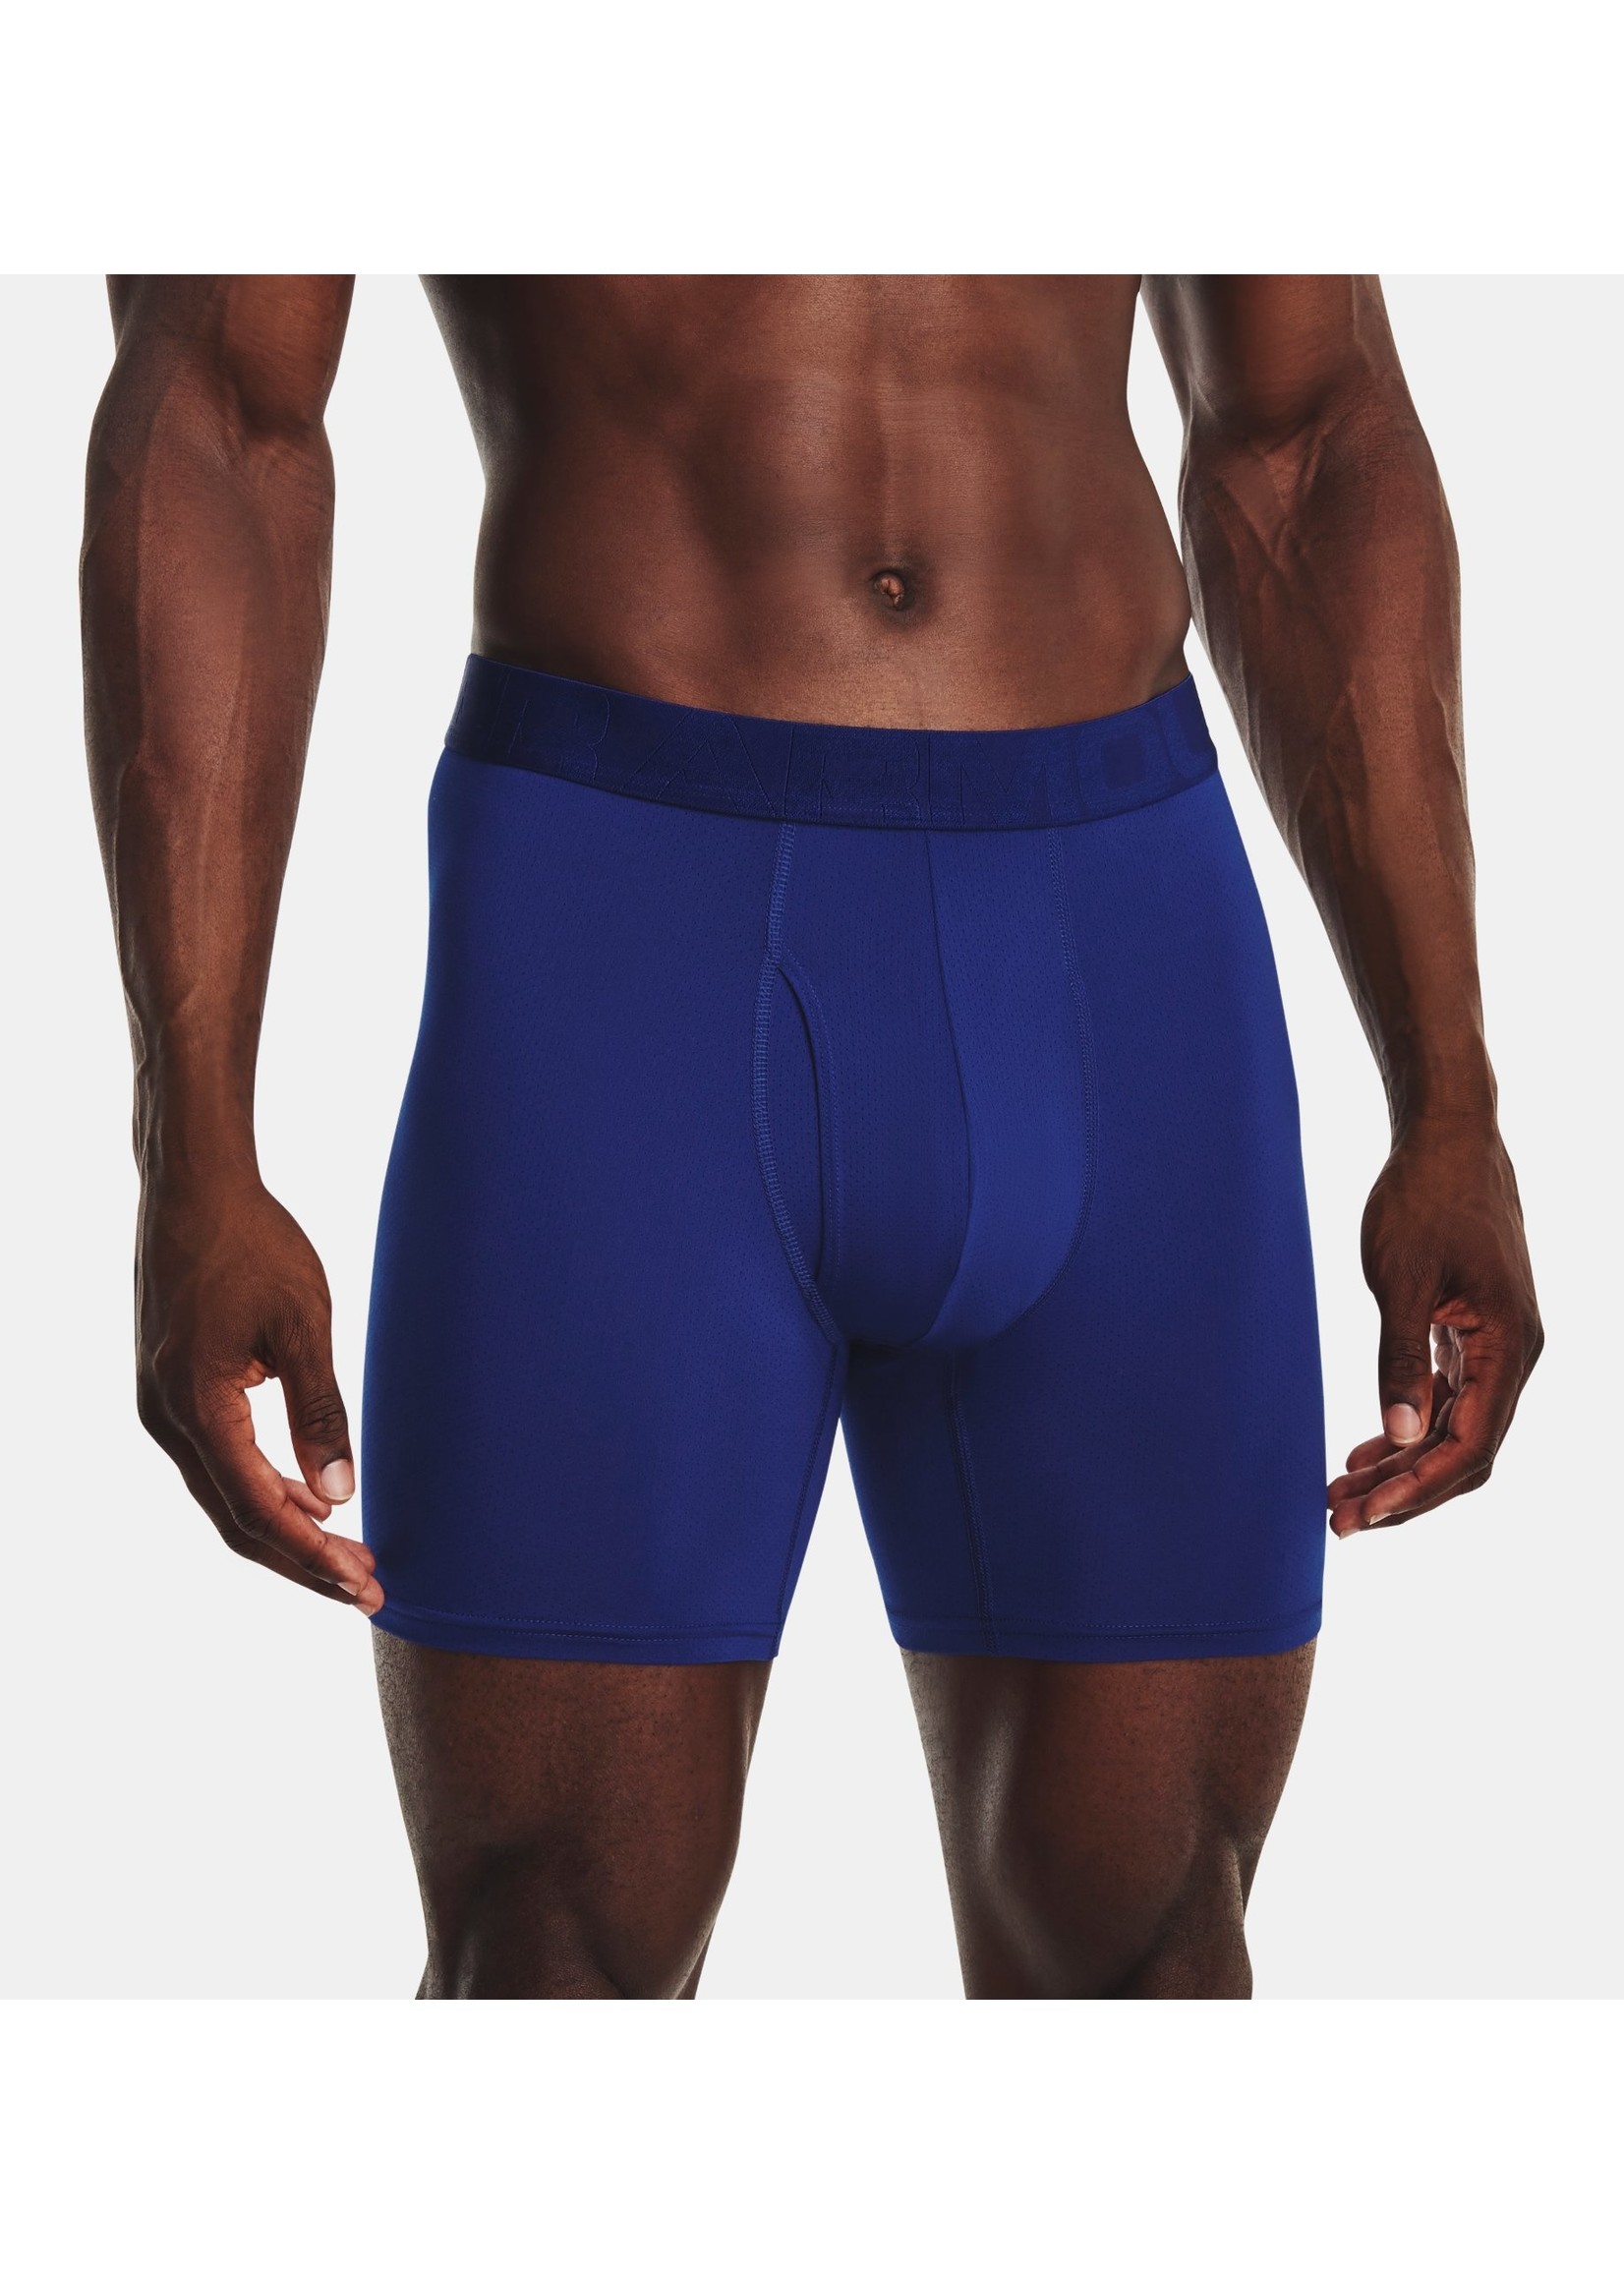 Under Armour Performance Mesh Boxer Briefs 2-Pack - Macy's